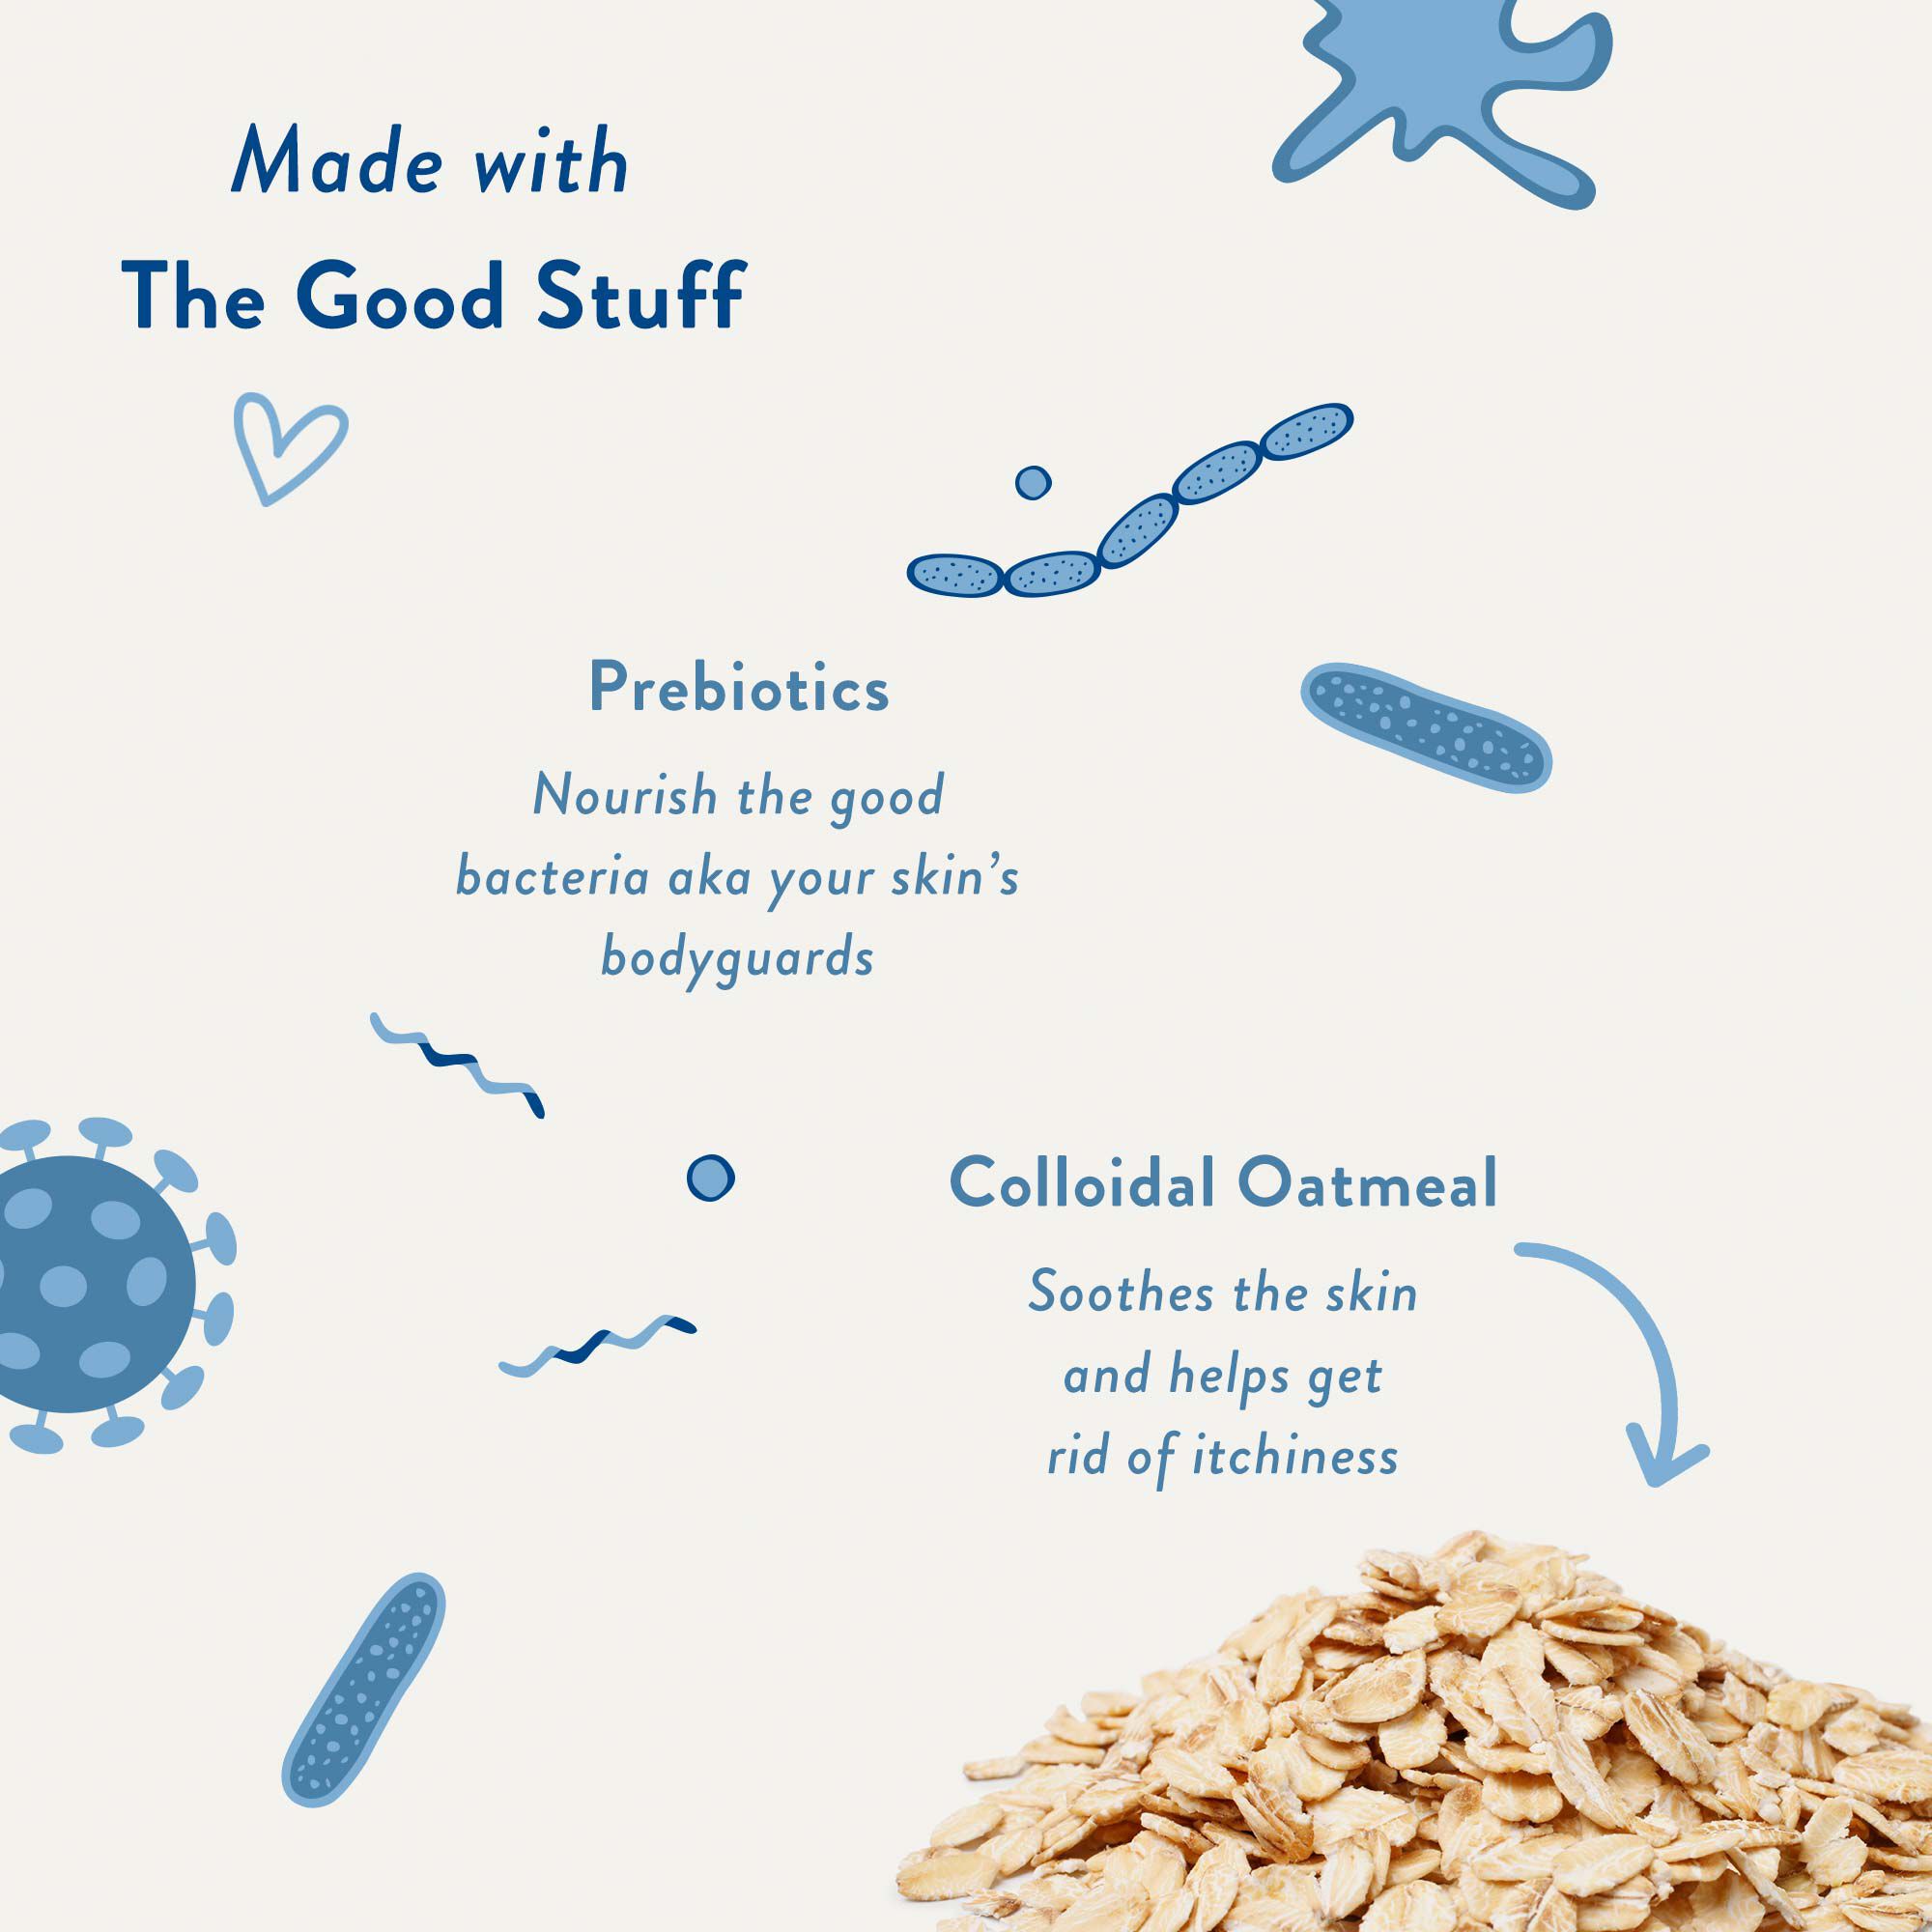 ingredient callouts like collodial oatmeal and prebiotics